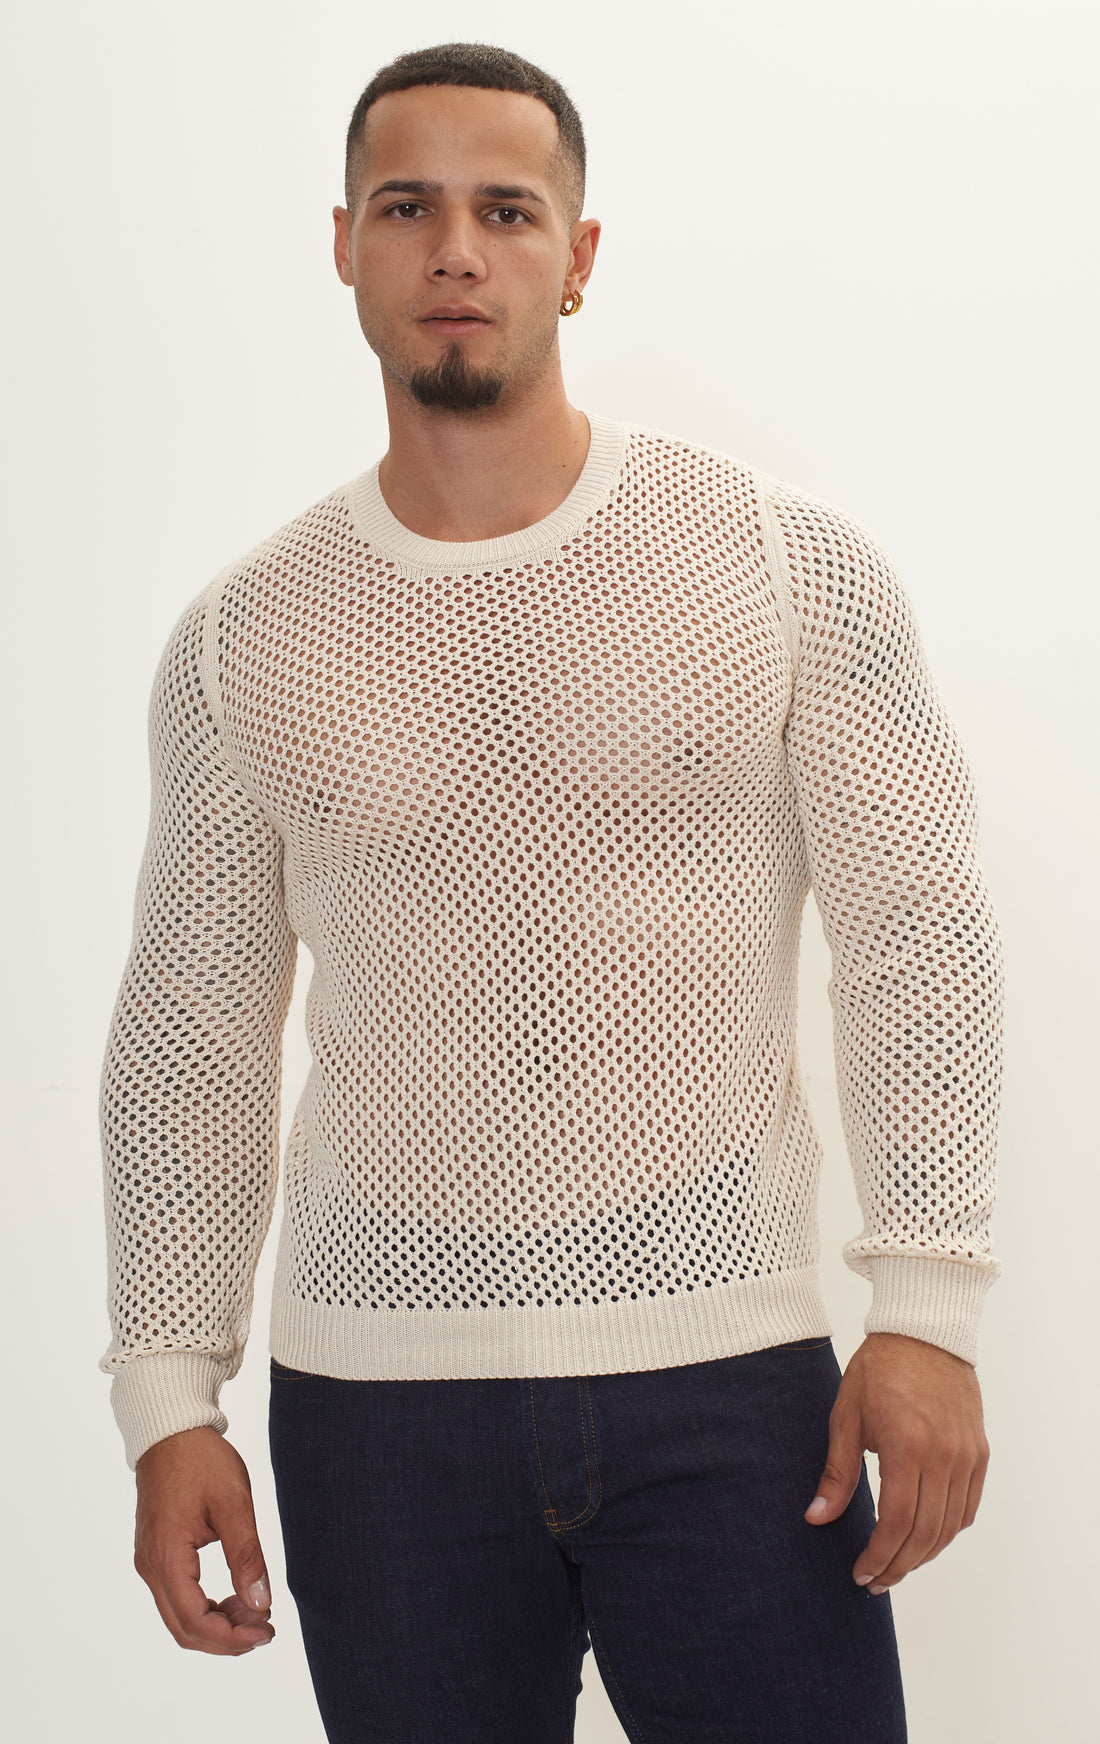 See Through Fishnet Muscle Fit Shirt - Beige